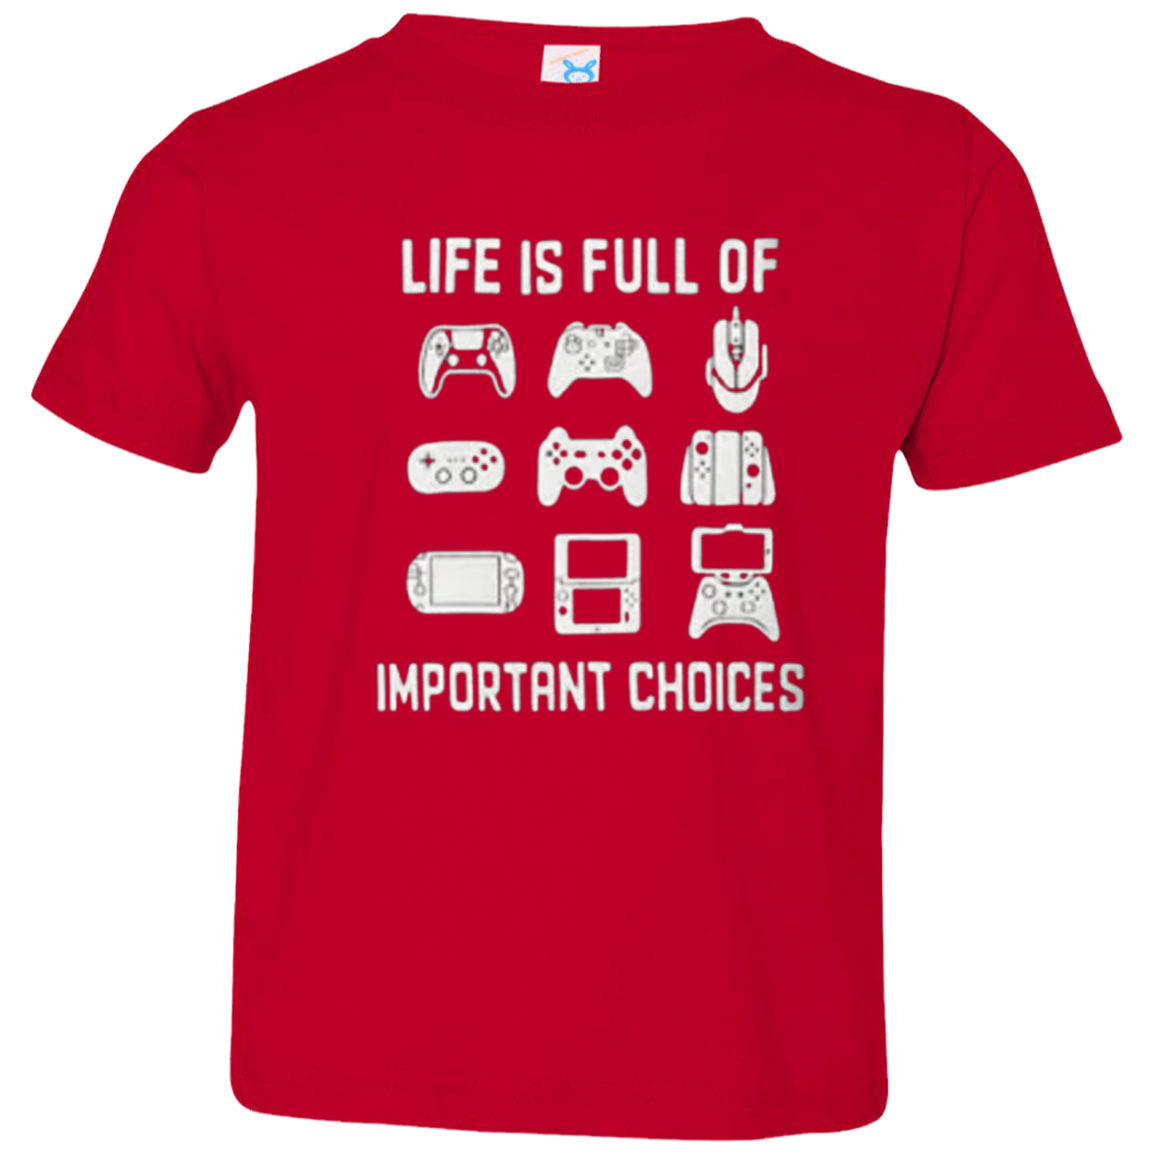 Life is full of important choices! Tee